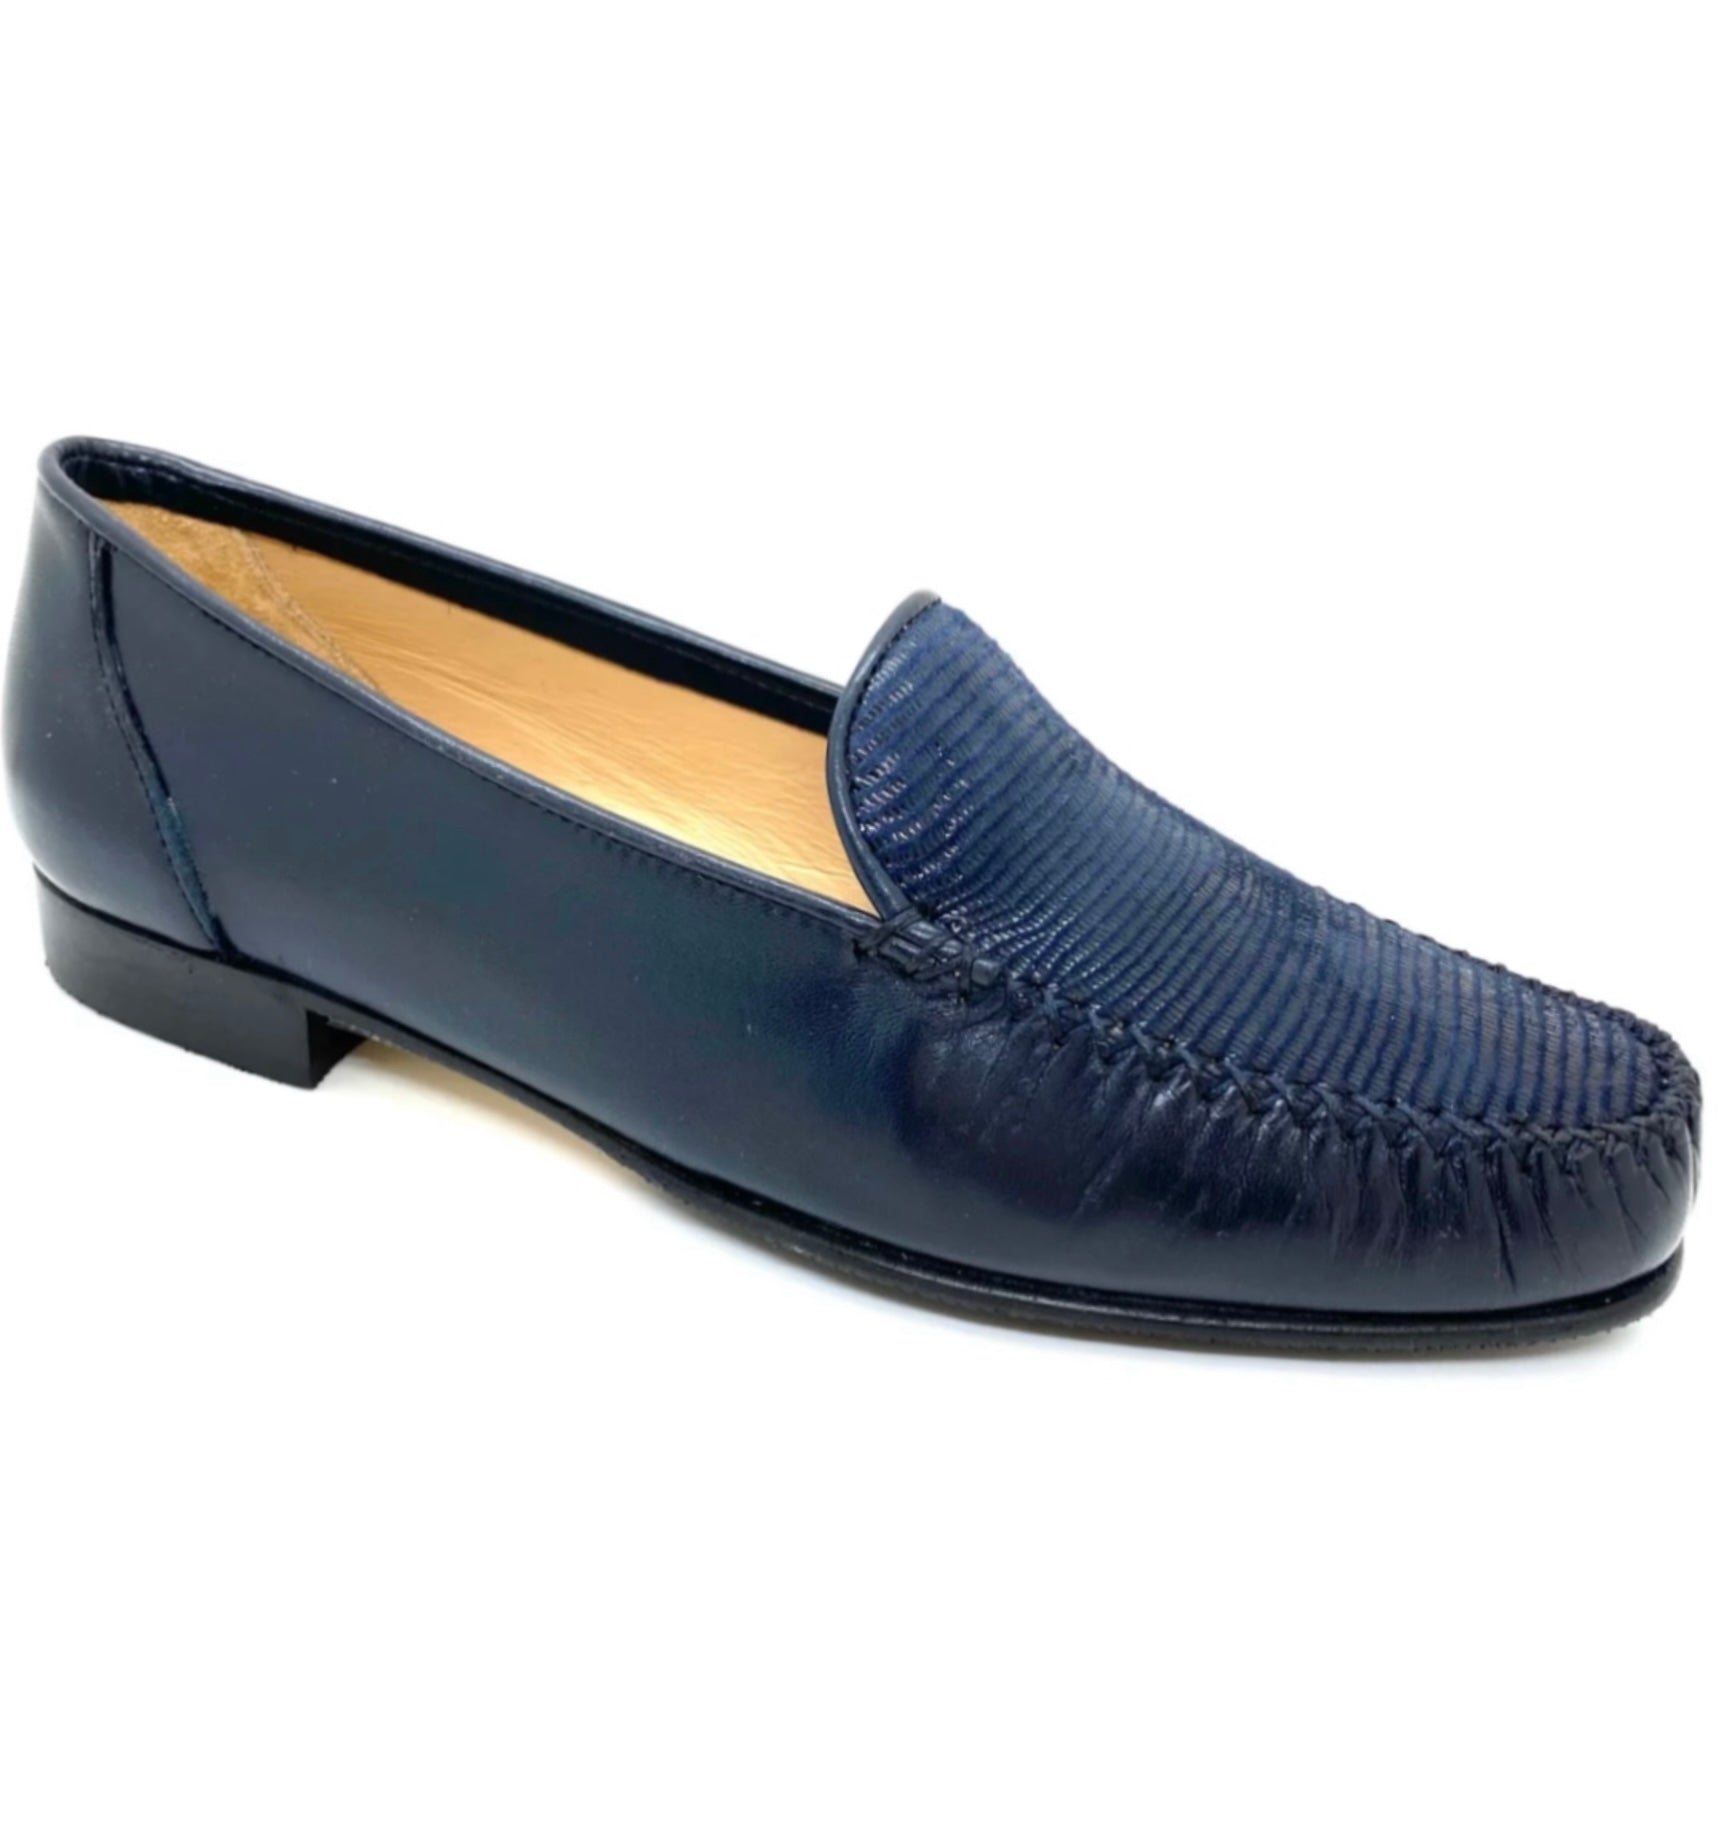 Madison Leather Low Heel Loafer